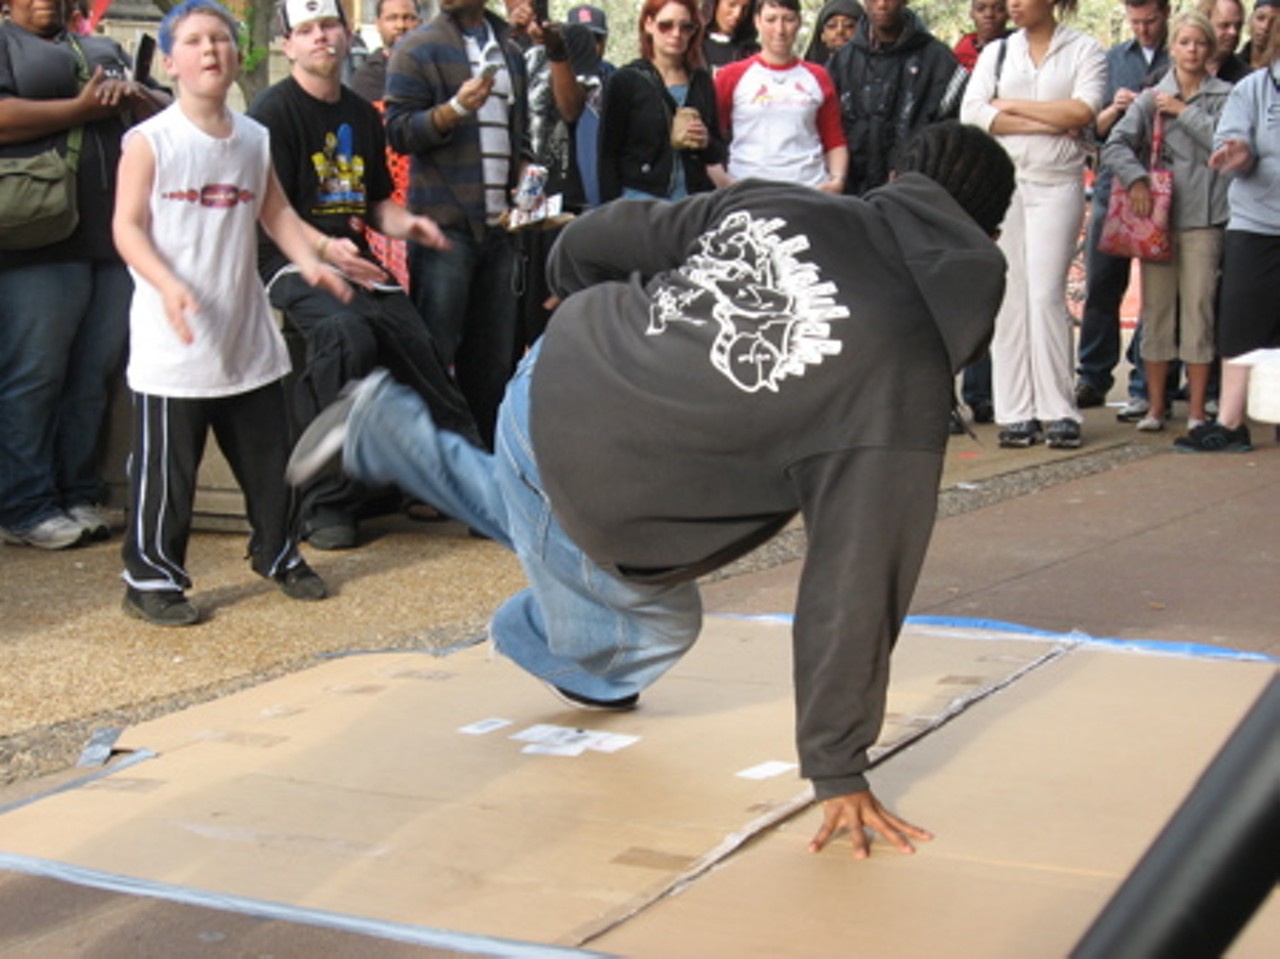 B-Boys lay down the cardboard and give a little performance.